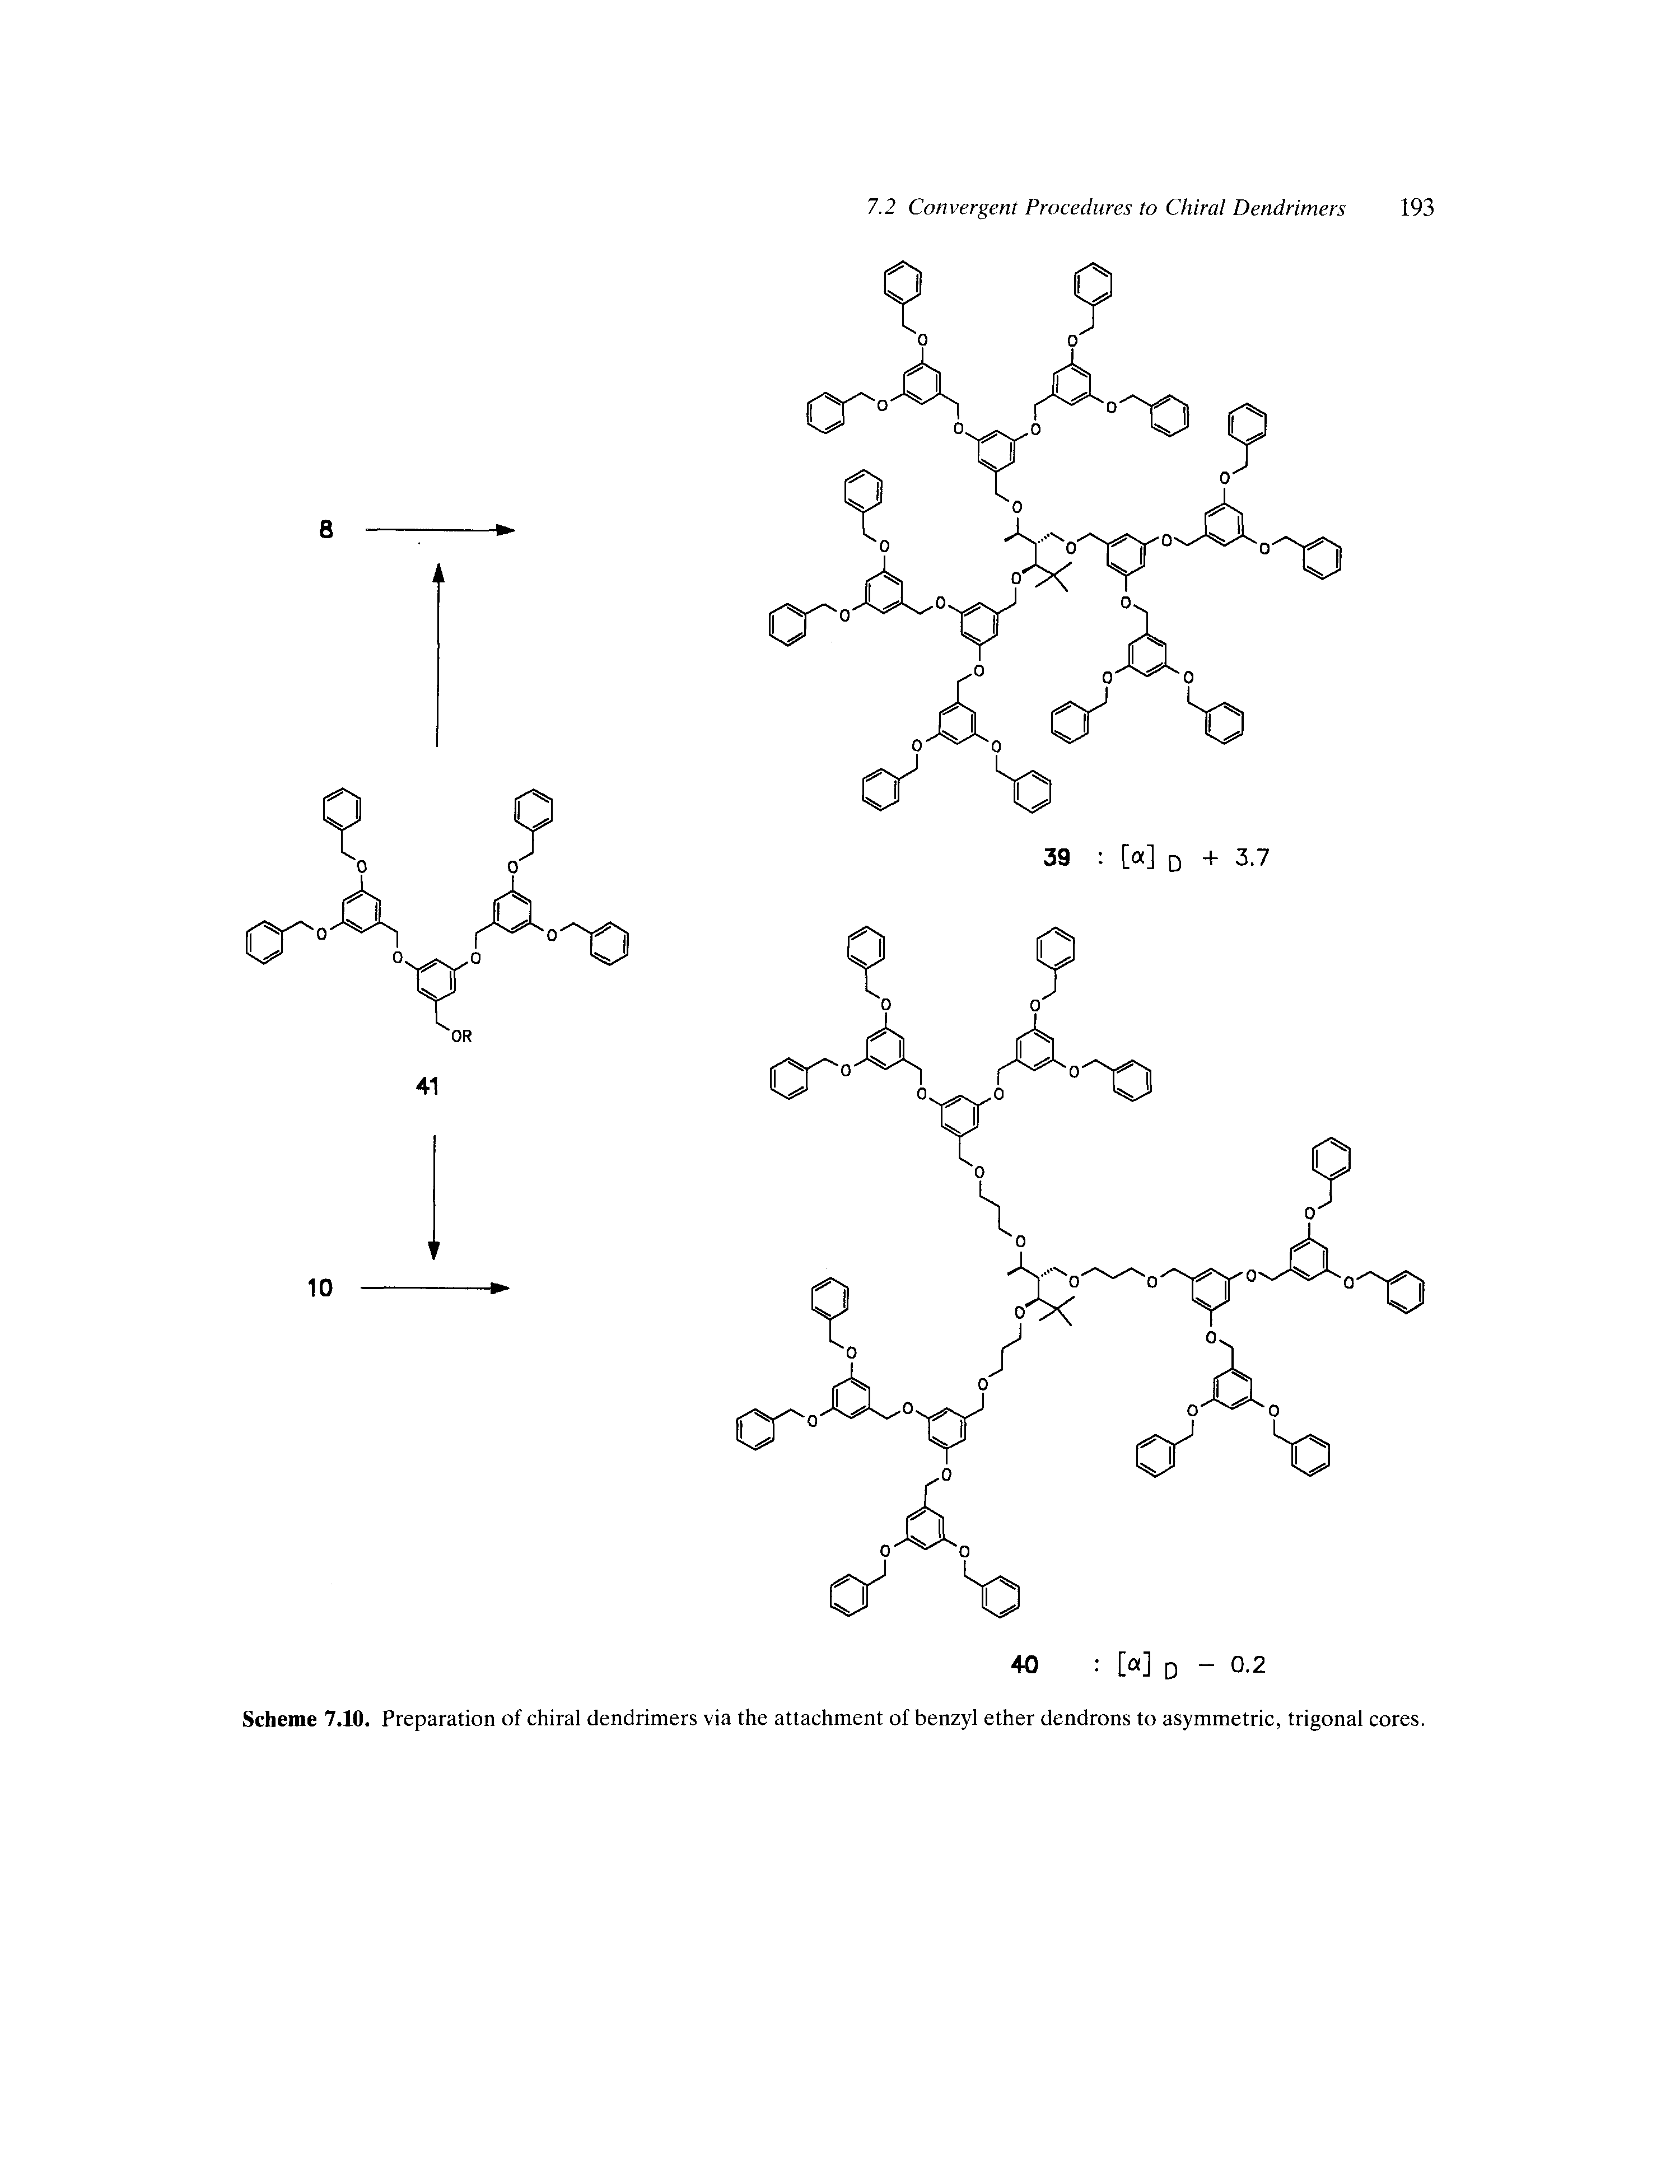 Scheme 7.10. Preparation of chiral dendrimers via the attachment of benzyl ether dendrons to asymmetric, trigonal cores.